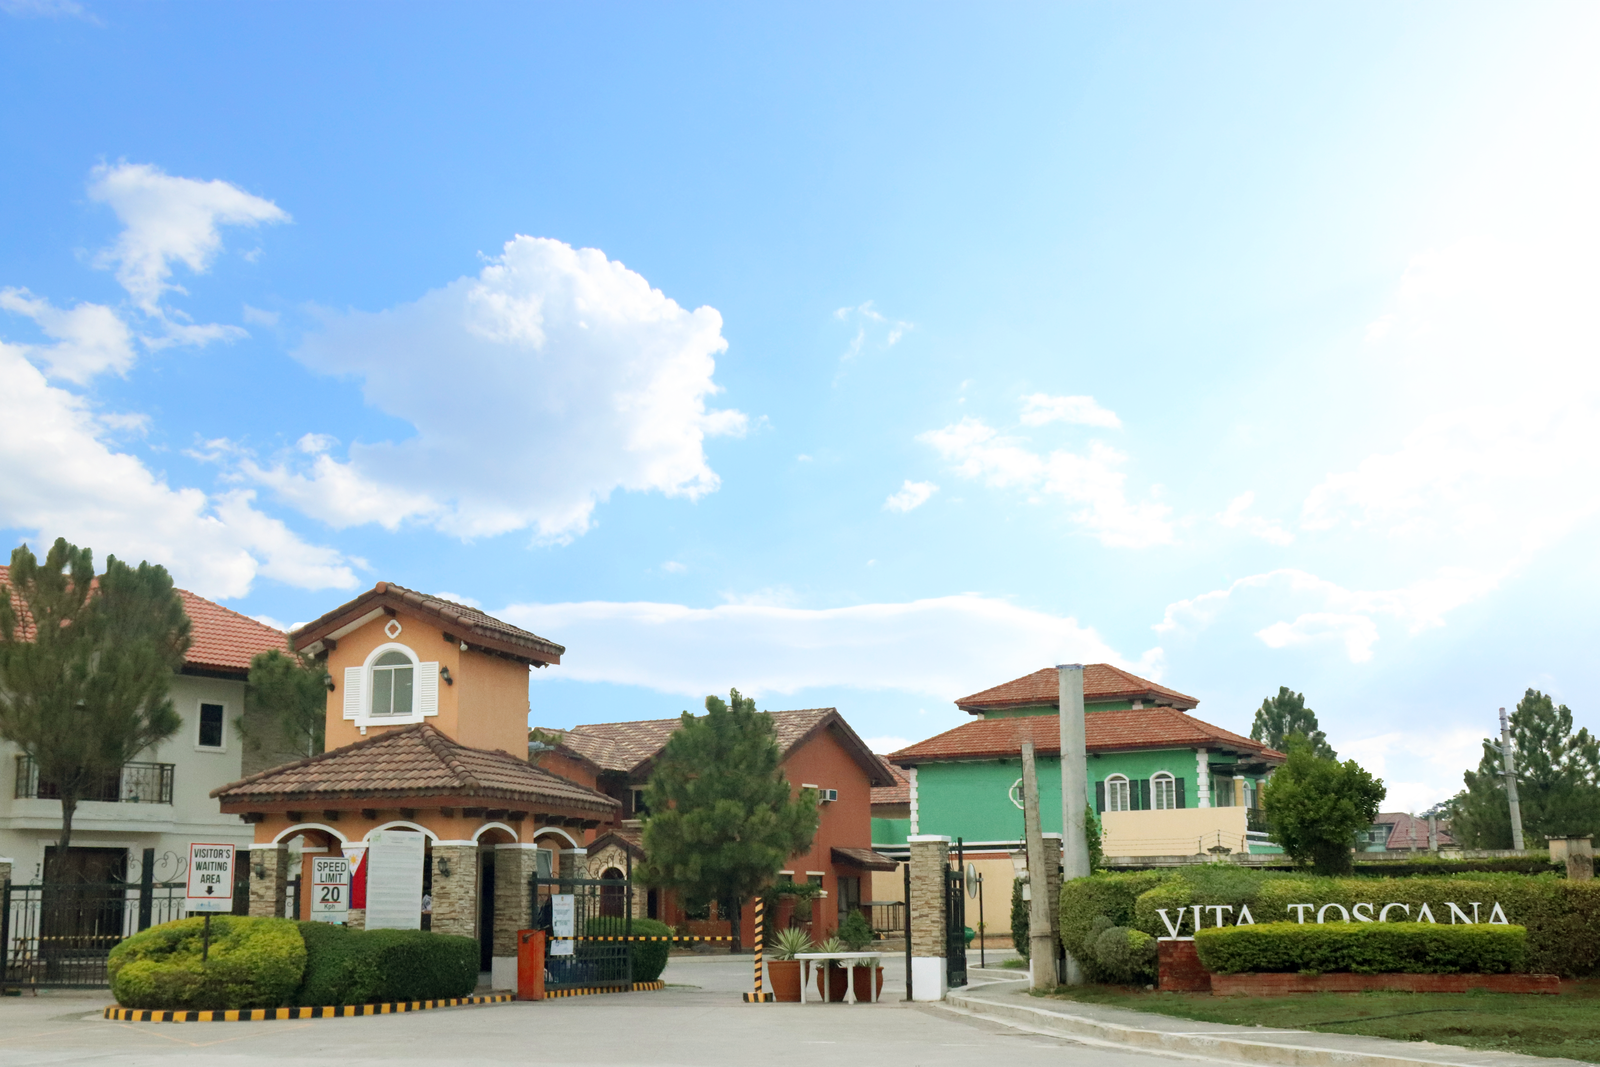 150 sqm Residential Lot for sale in Bacoor, Cavite | Vita Toscana by Crown Asia